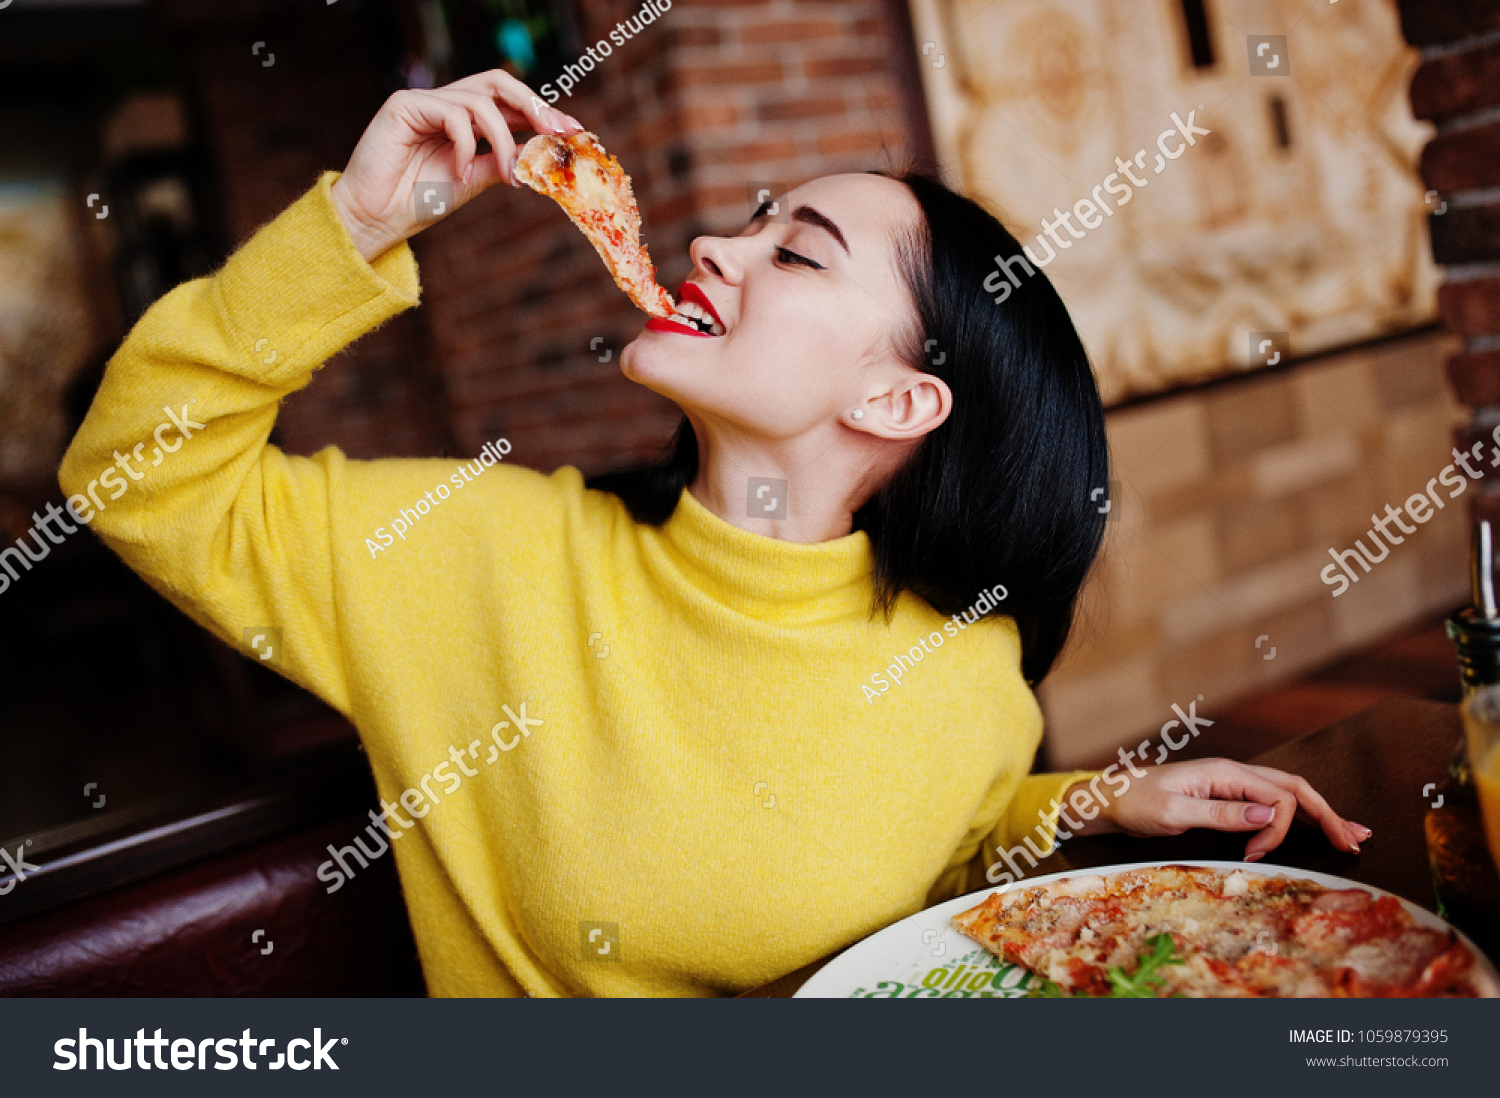 Funny brunette girl in yellow sweater eating pizza at restaurant.  #1059879395